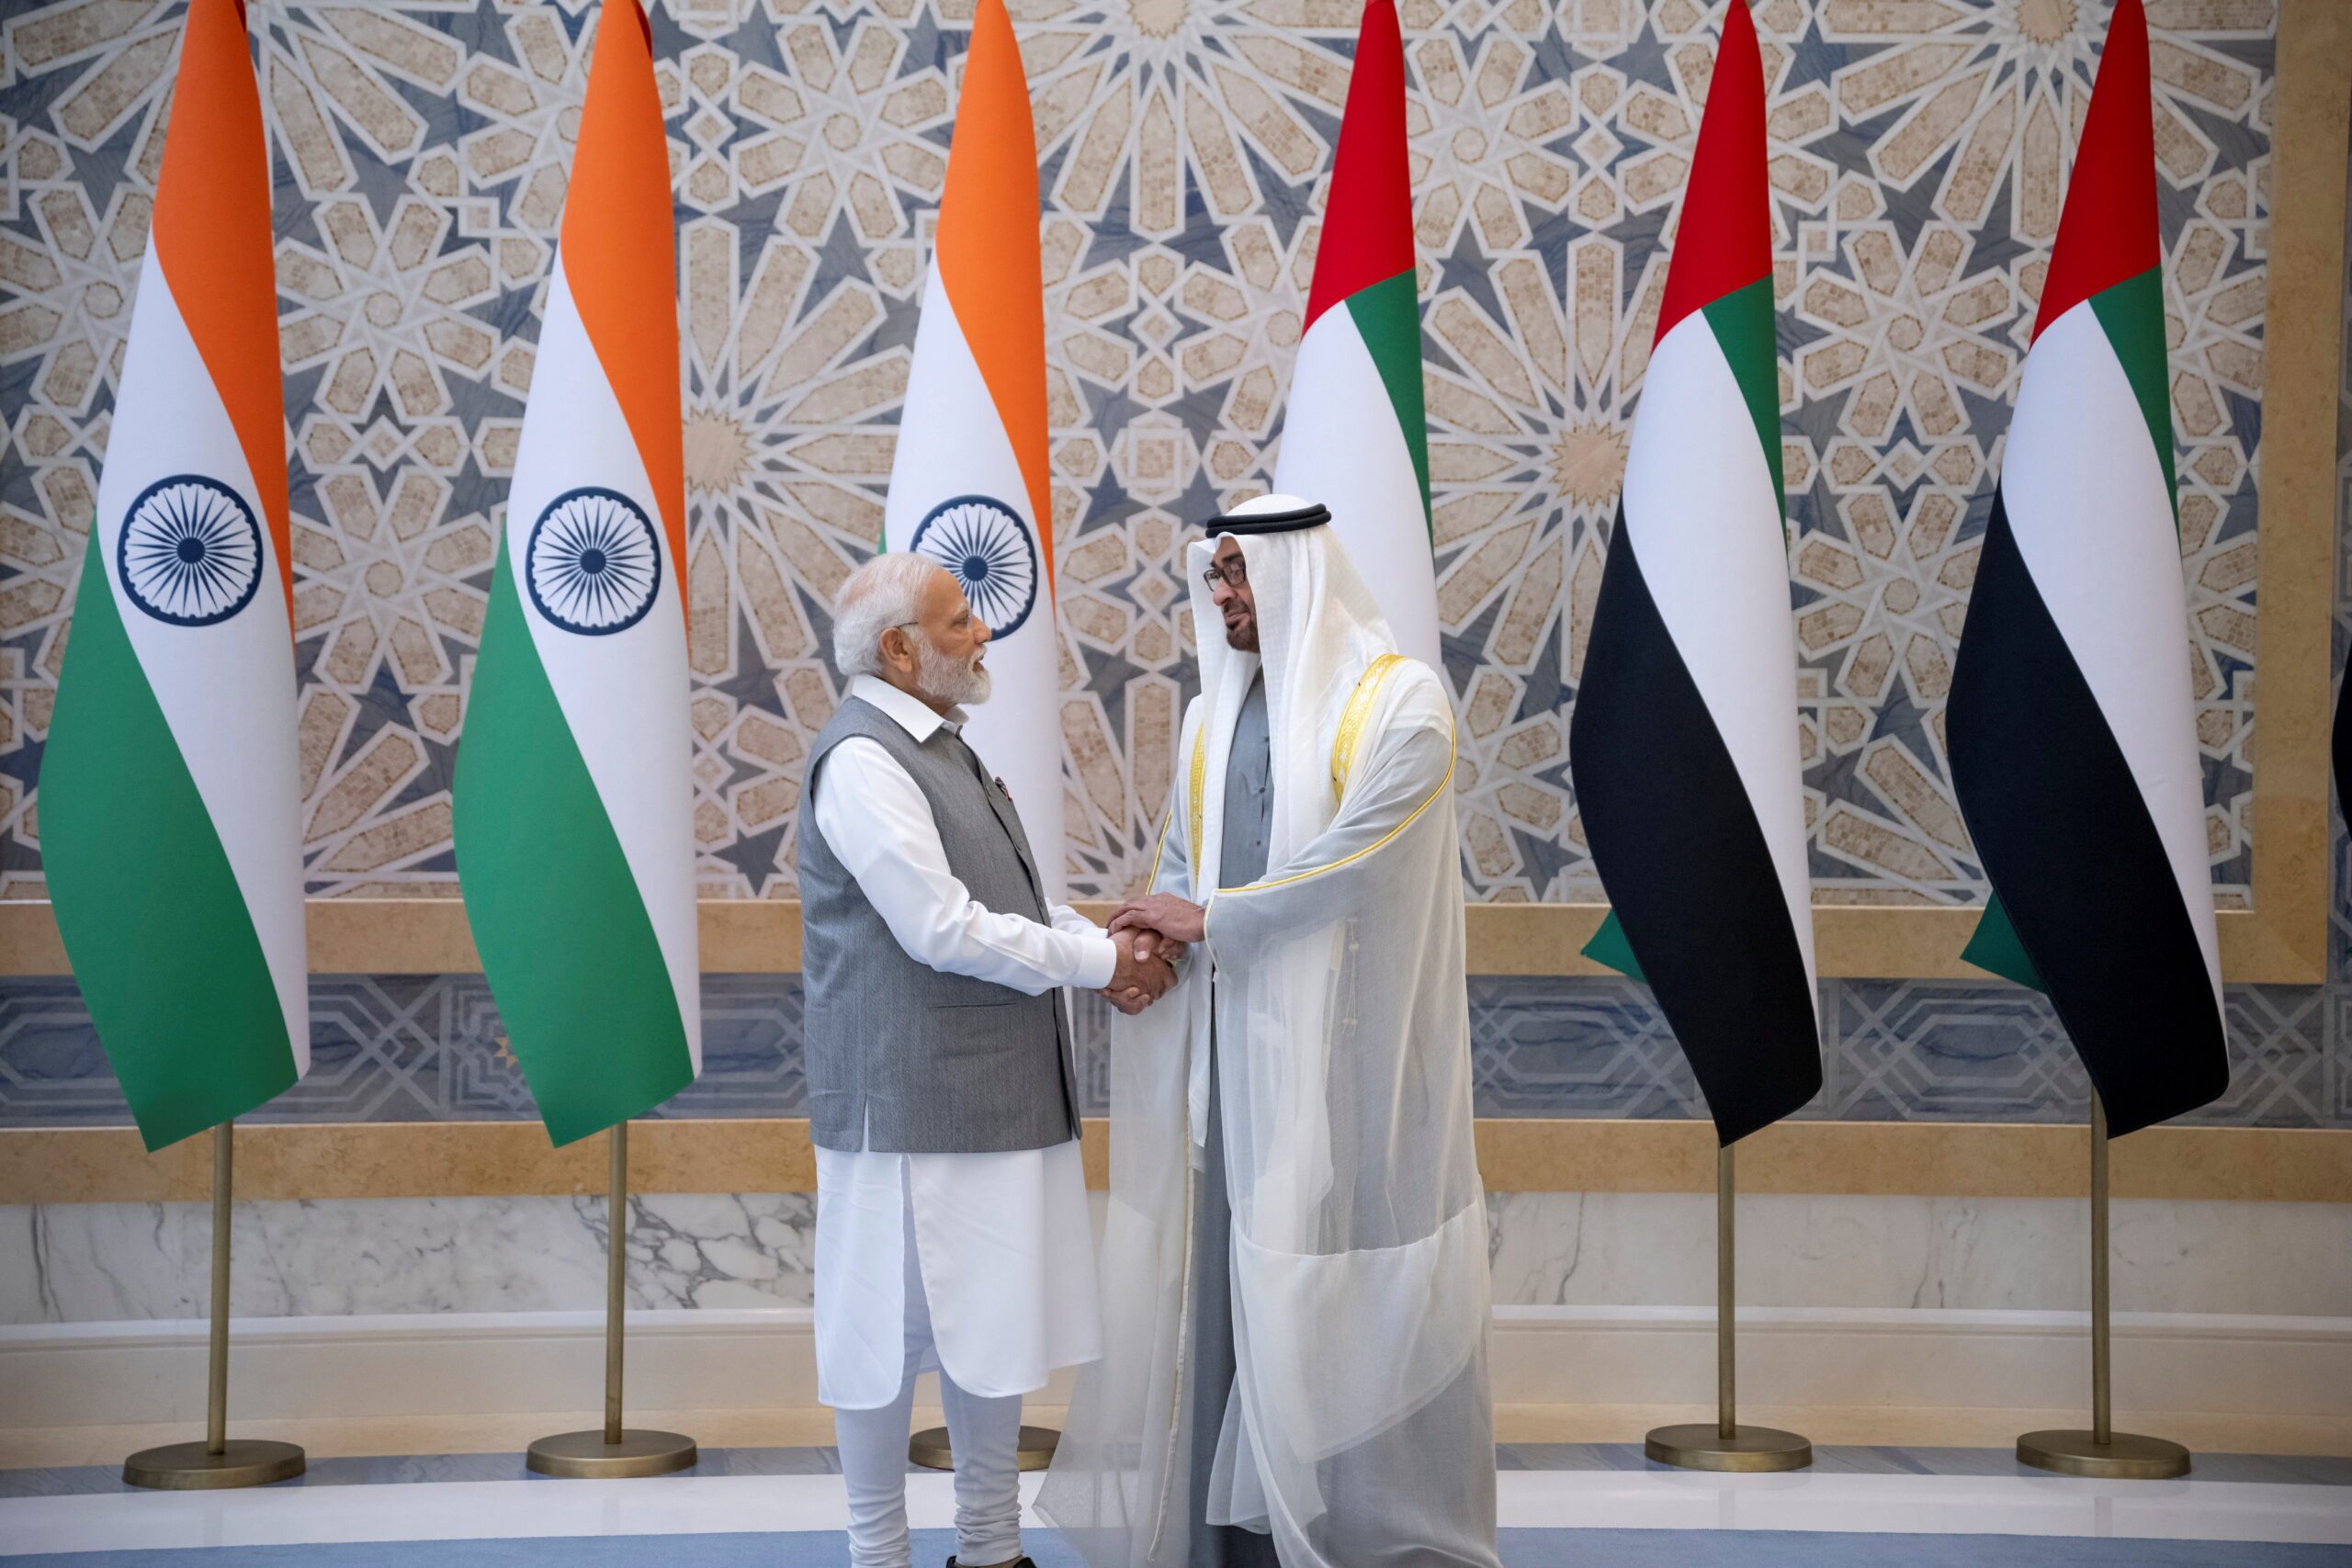 UAE President Sheikh Mohamed bin Zayed Al Nahyan and Indian Prime Minister Narendra Modi met last year to improve trade relations, but red tape still hampers investment